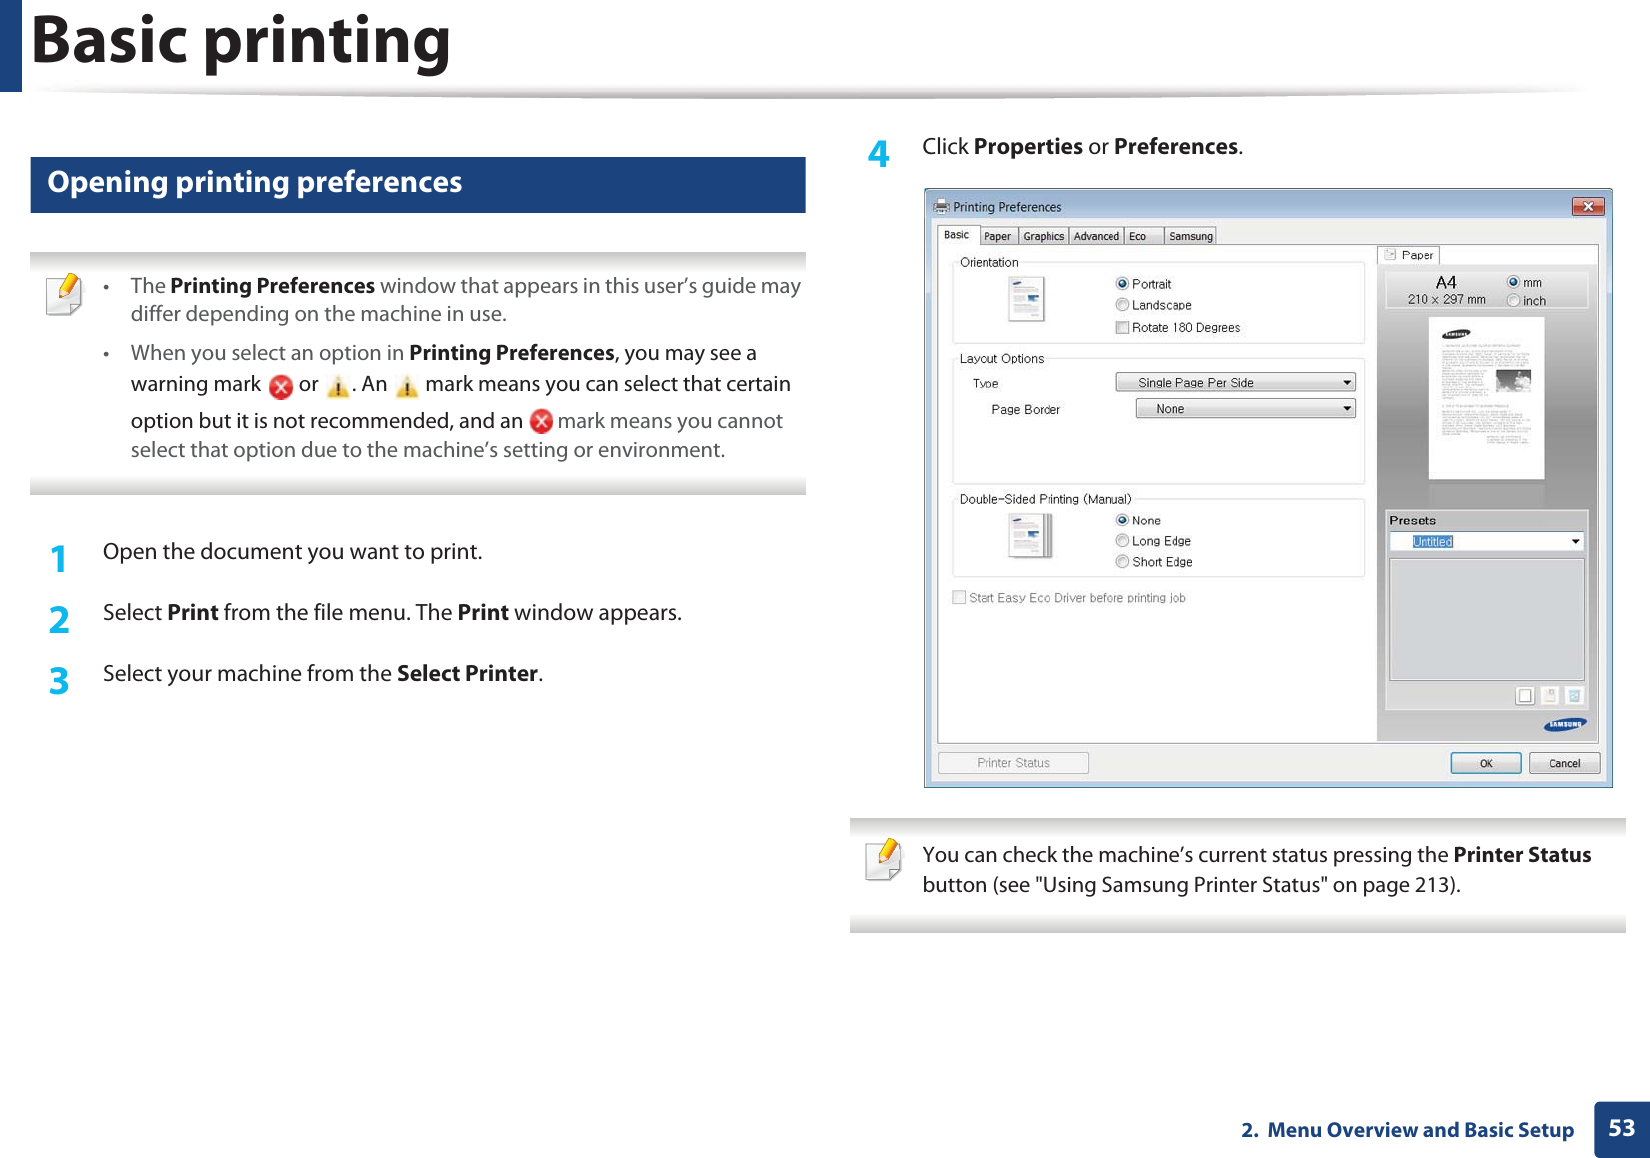 Basic printing532.  Menu Overview and Basic Setup11 Opening printing preferences • The Printing Preferences window that appears in this user’s guide may differ depending on the machine in use. • When you select an option in Printing Preferences, you may see a warning mark   or  . An   mark means you can select that certain option but it is not recommended, and an   mark means you cannot select that option due to the machine’s setting or environment. 1Open the document you want to print.2  Select Print from the file menu. The Print window appears. 3  Select your machine from the Select Printer. 4  Click Properties or Preferences.  You can check the machine’s current status pressing the Printer Status button (see &quot;Using Samsung Printer Status&quot; on page 213). 